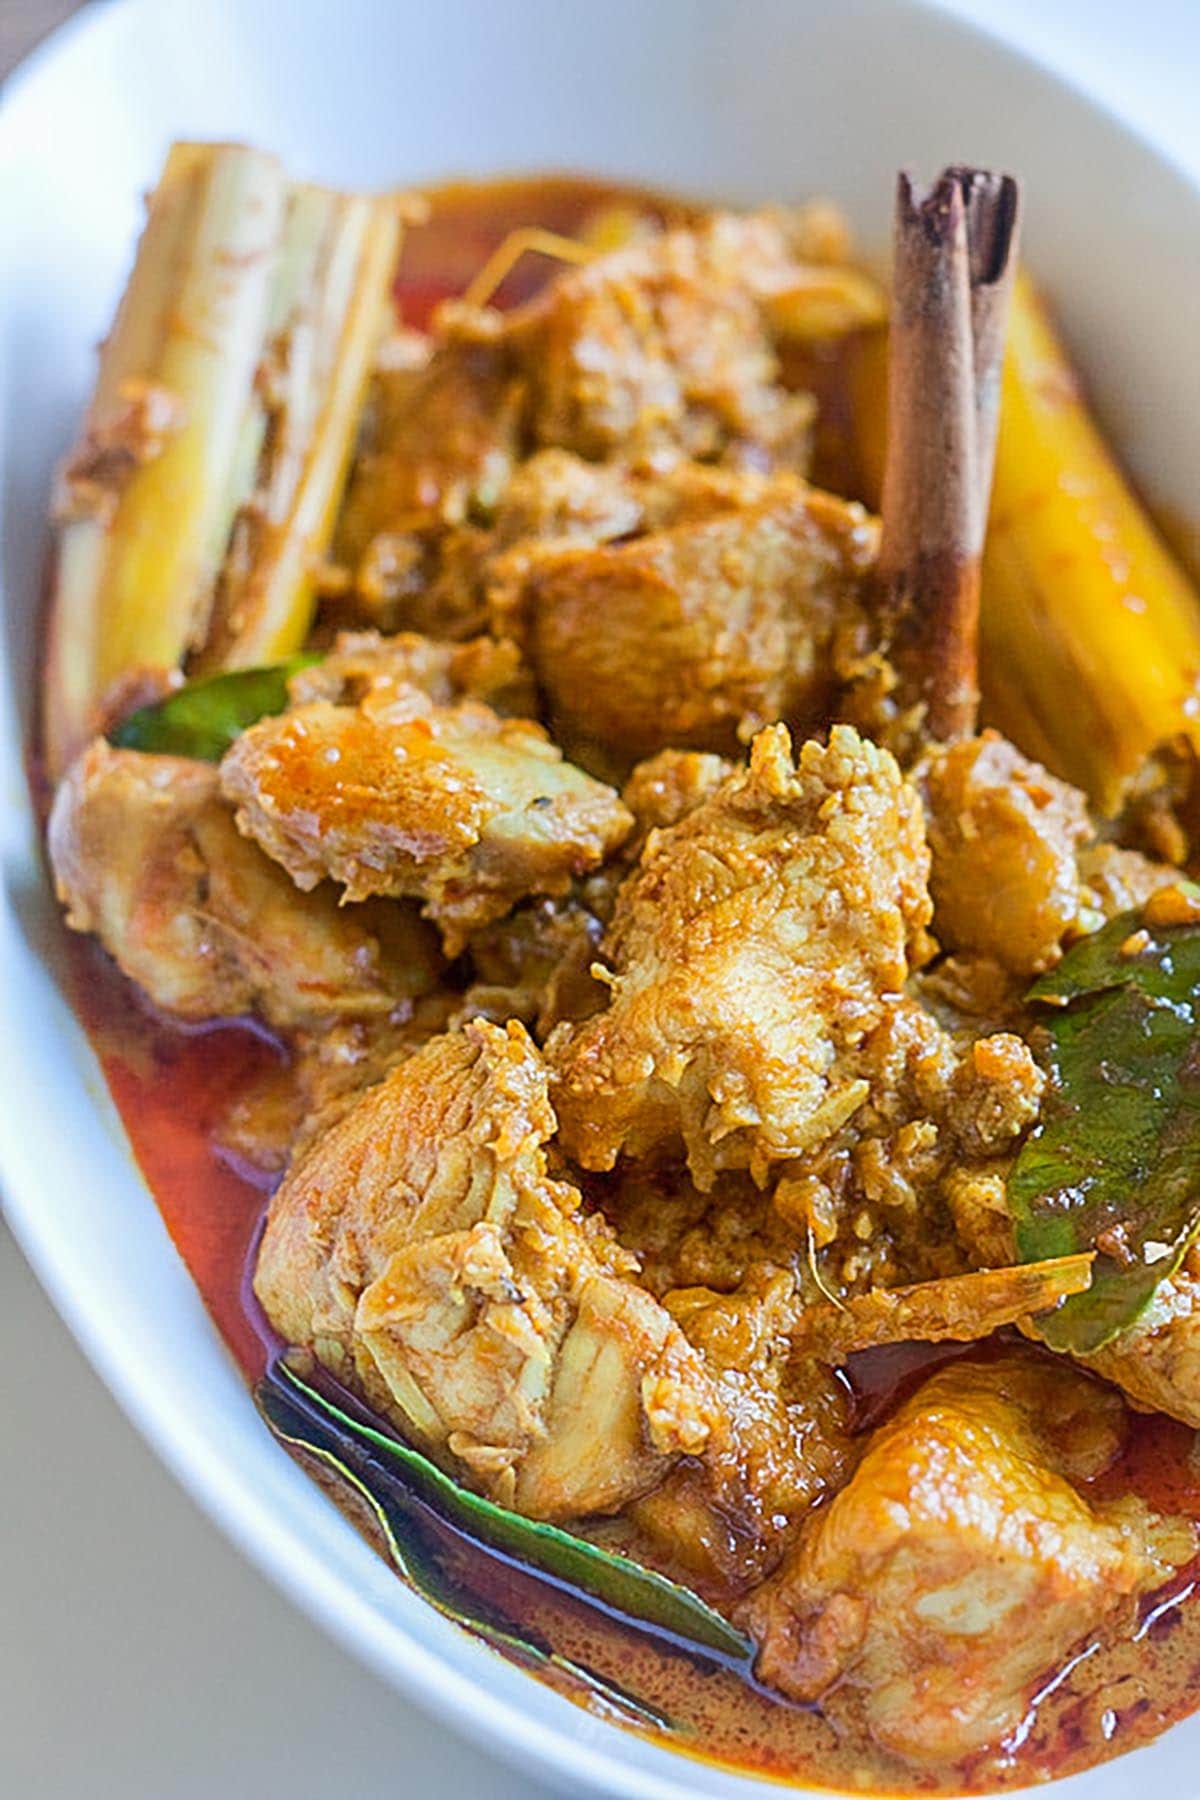 Delicious chicken curry and authentic chicken curry recipe with chicken, curry paste, and coconut milk. Chicken curry has never been this good! | rasamalaysia.com